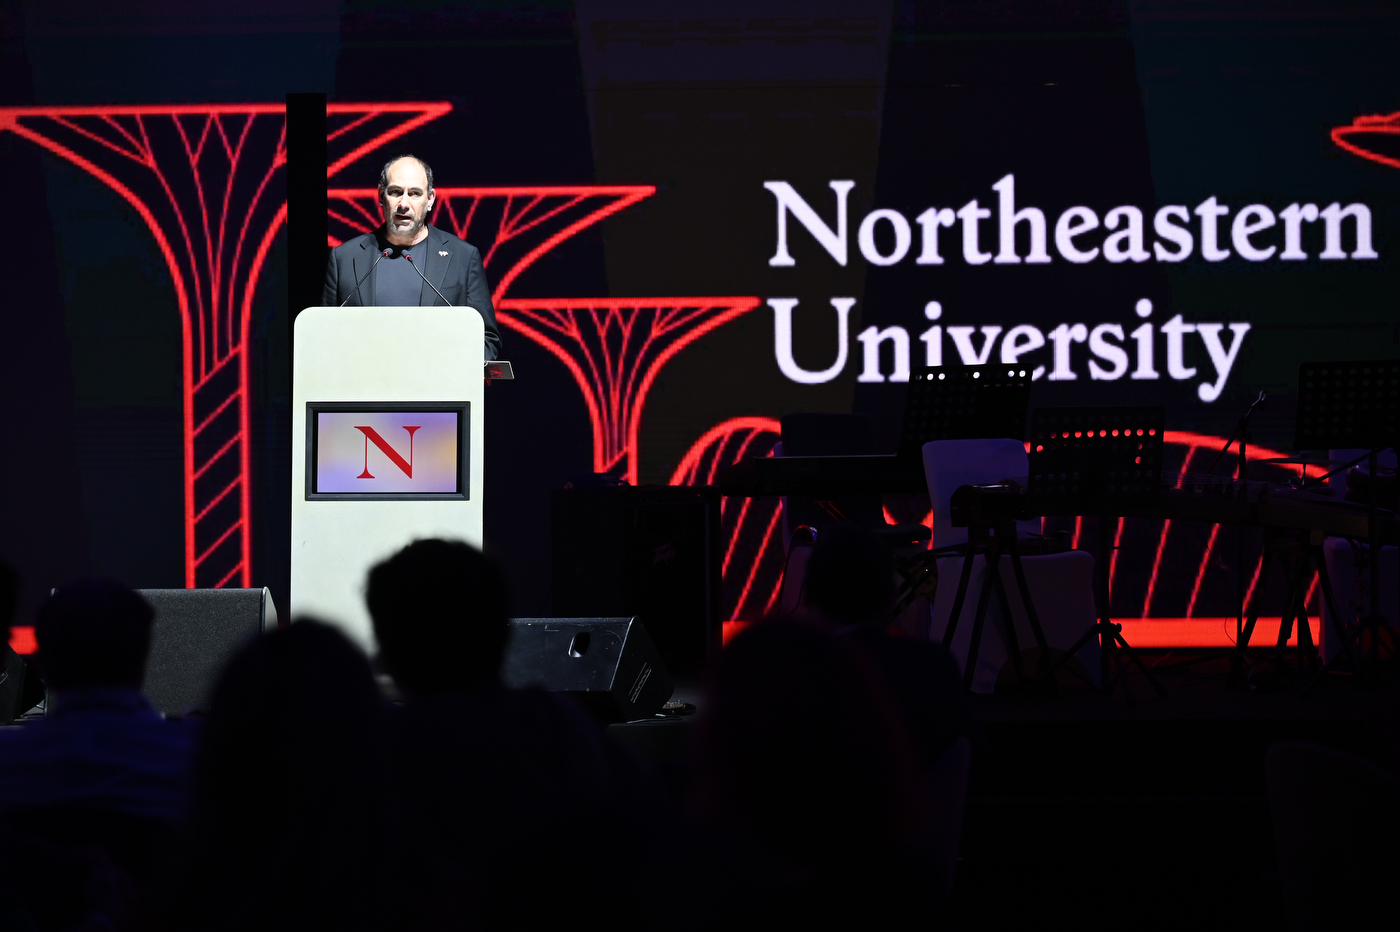 Northeastern President Joseph E. Aoun welcomed business, government and education leaders, as well as parents, students and graduates in Singapore for discussions about global issues.